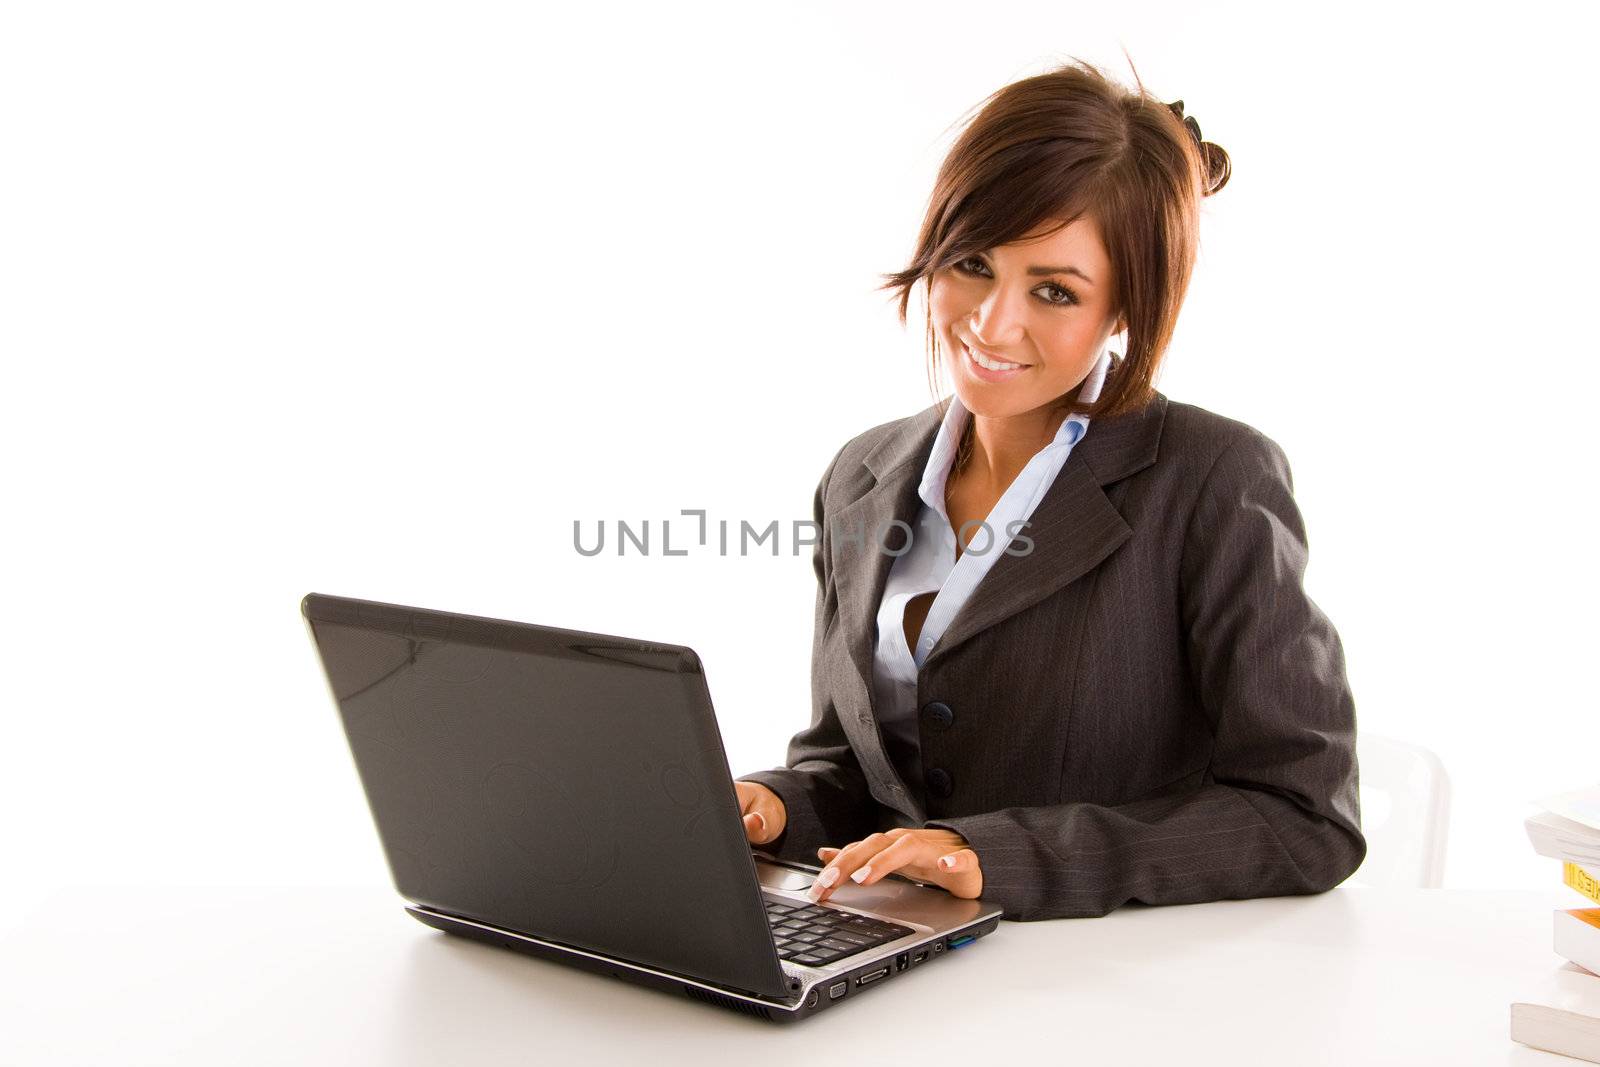 Young business student typing on a laptop